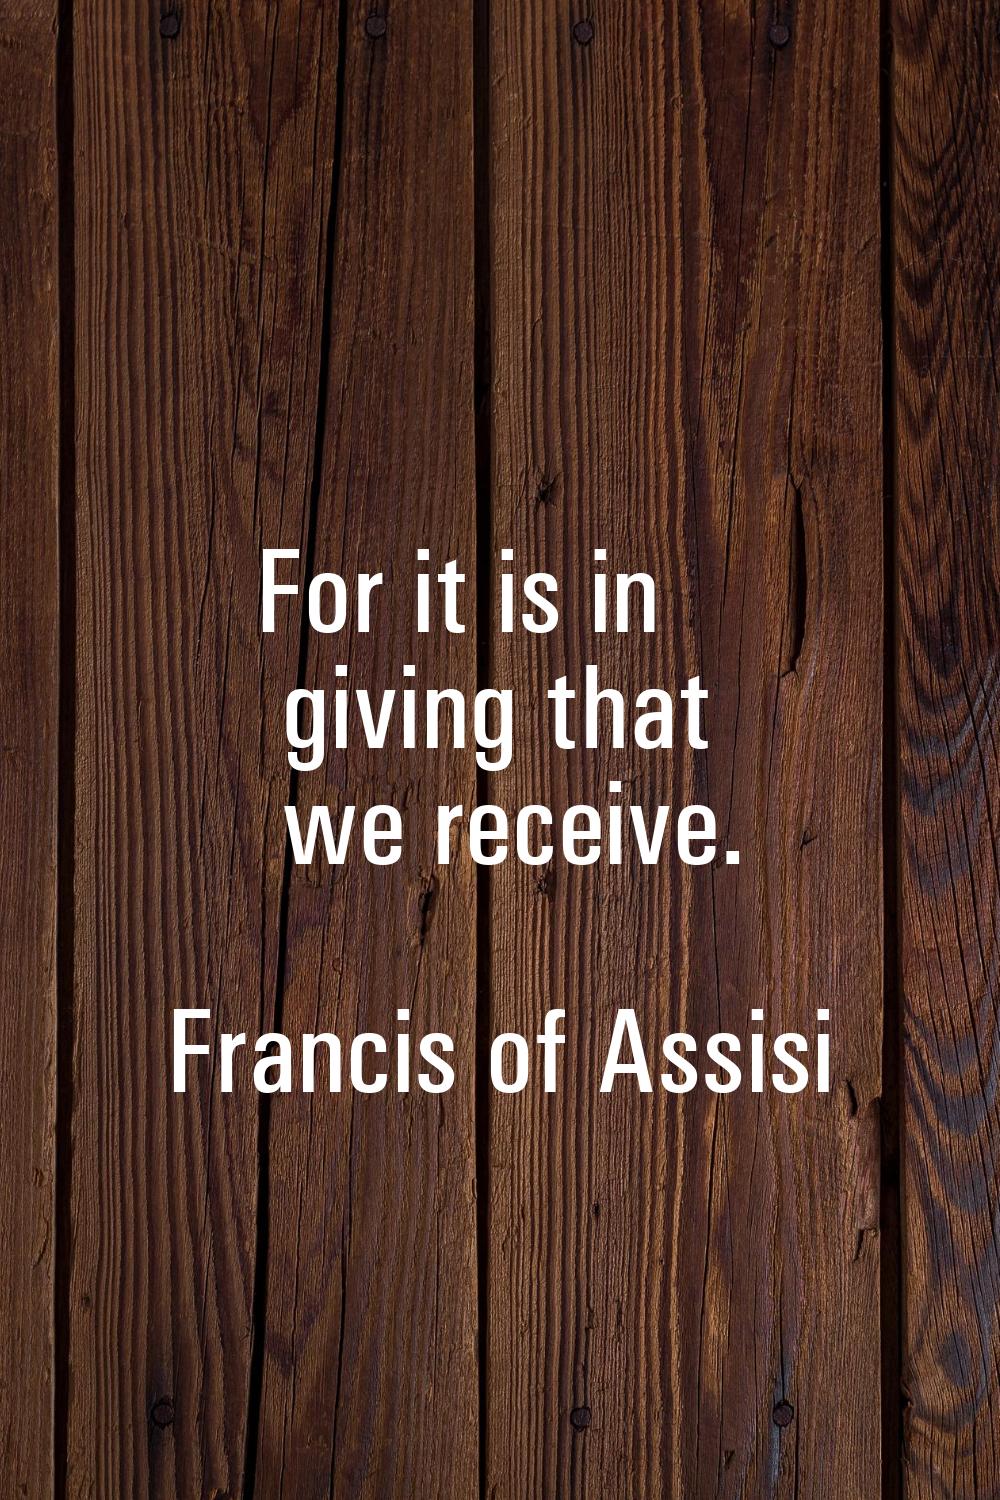 For it is in giving that we receive.